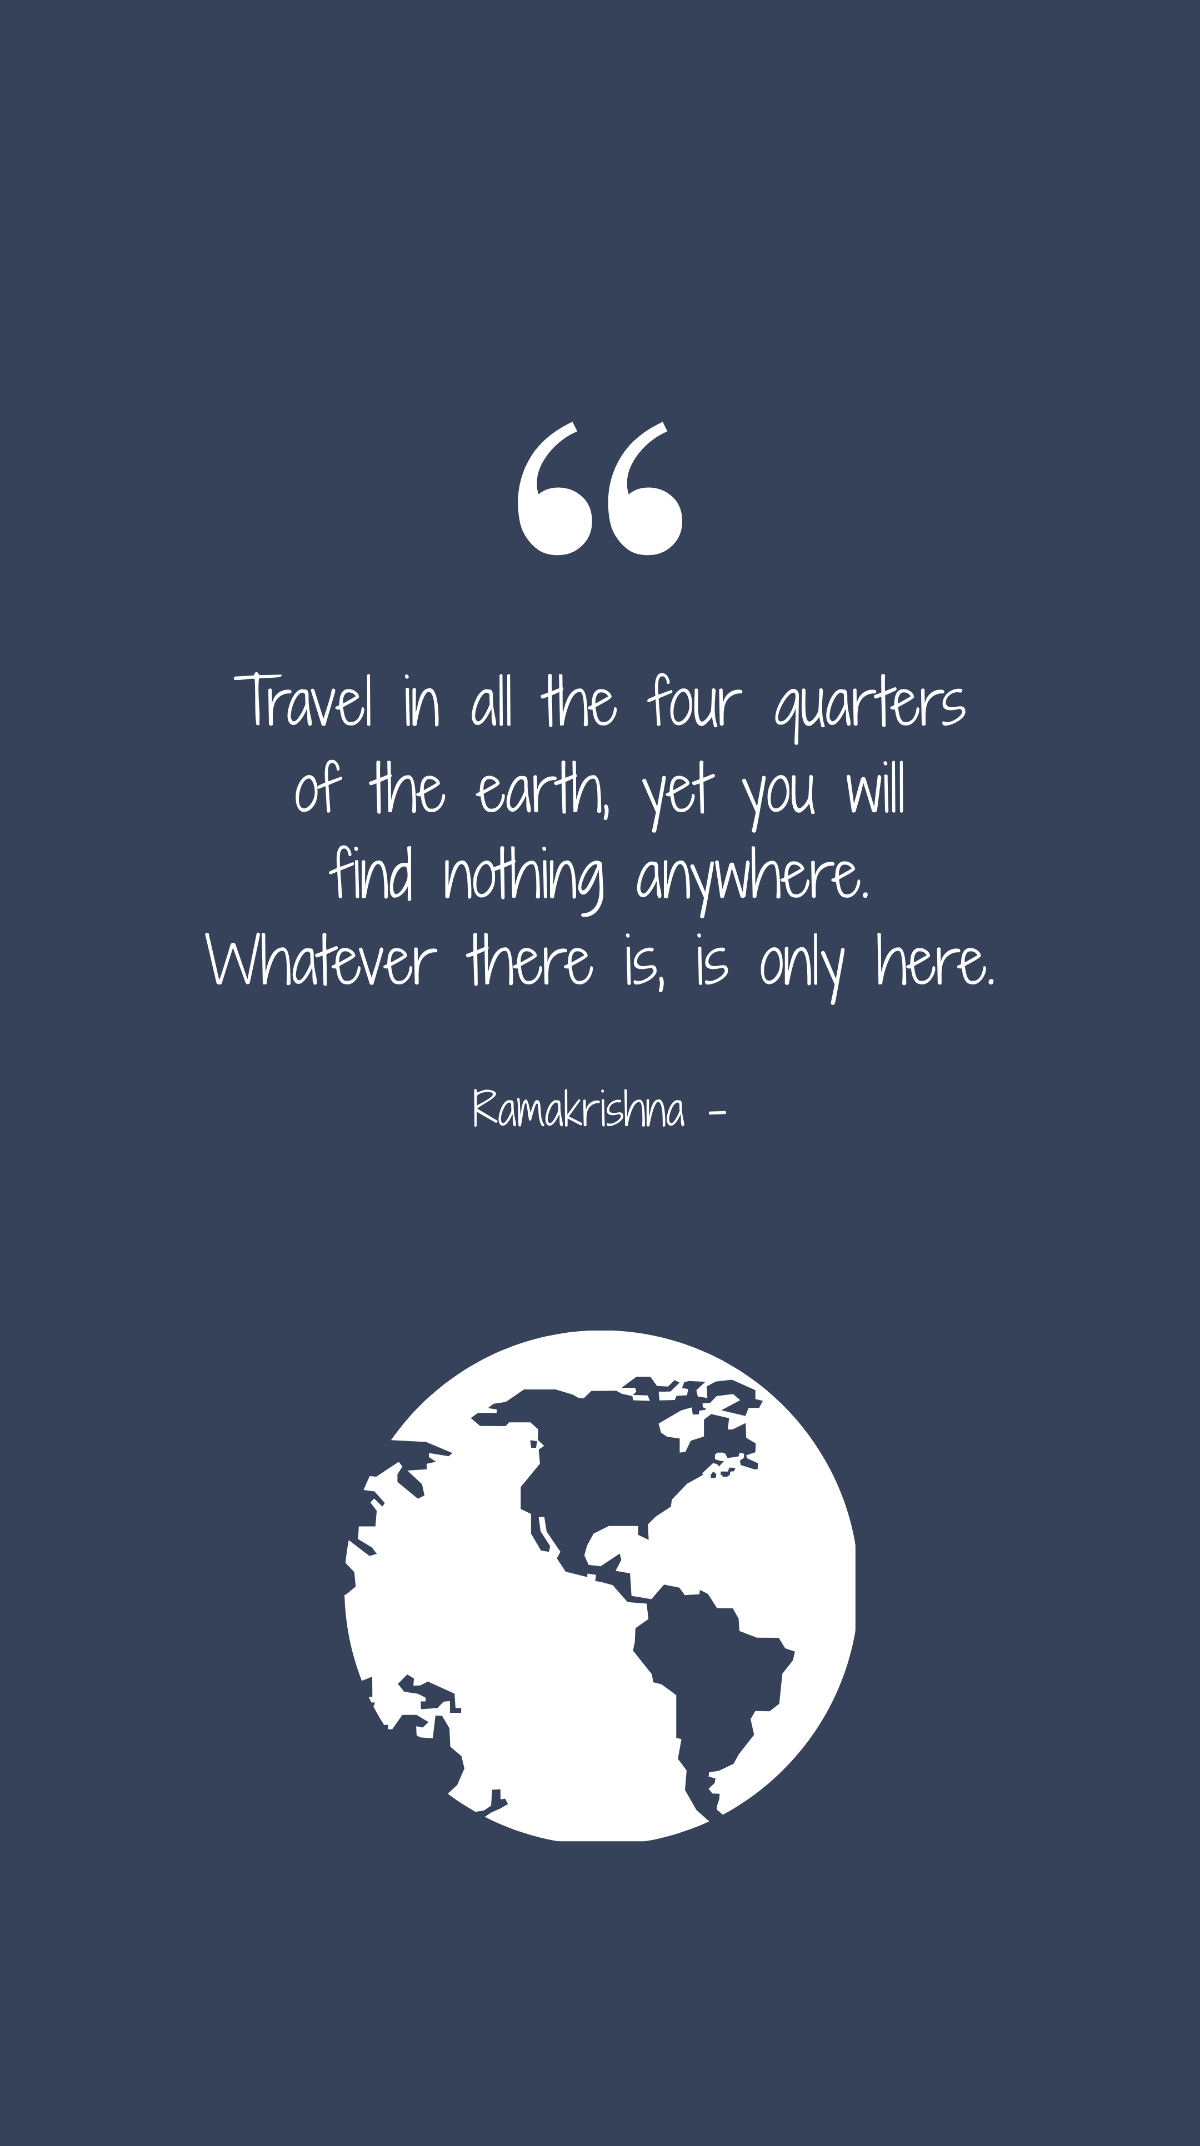 Free Ramakrishna - Travel in all the four quarters of the earth, yet you will find nothing anywhere. Whatever there is, is only here. Template